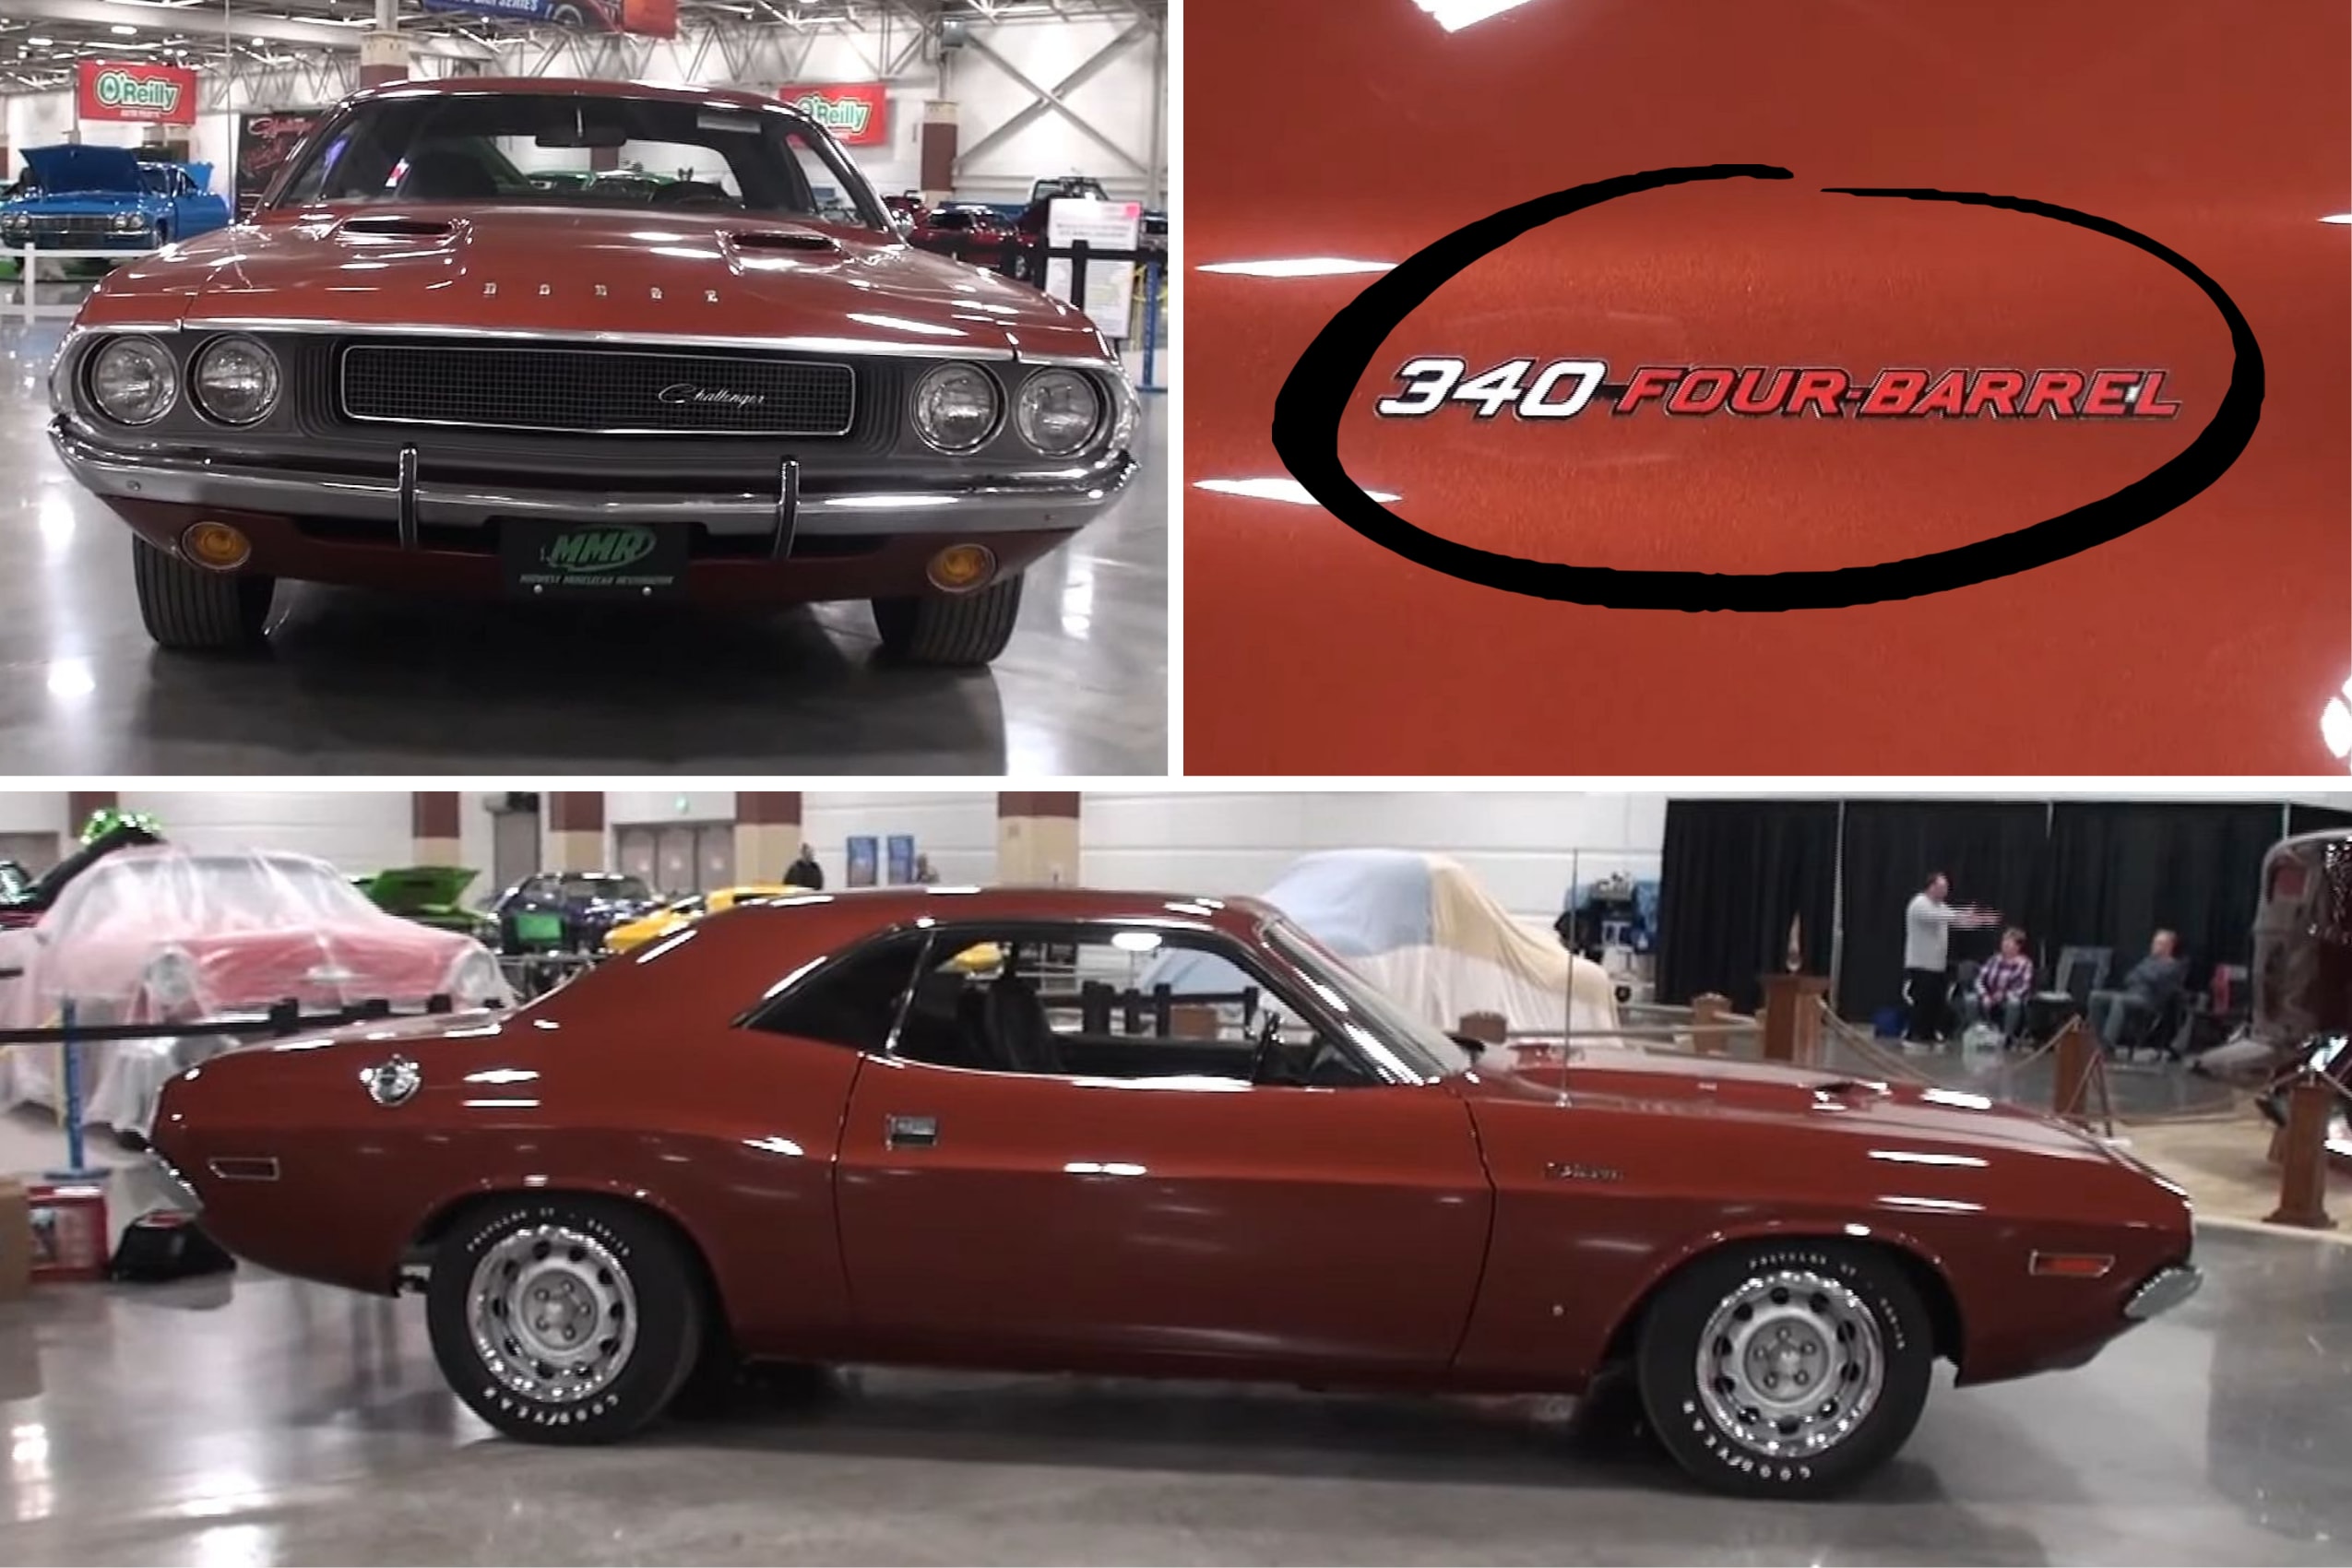 This 1970 Dodge Challenger Has a Rare Feature You Probably Never Knew Existed